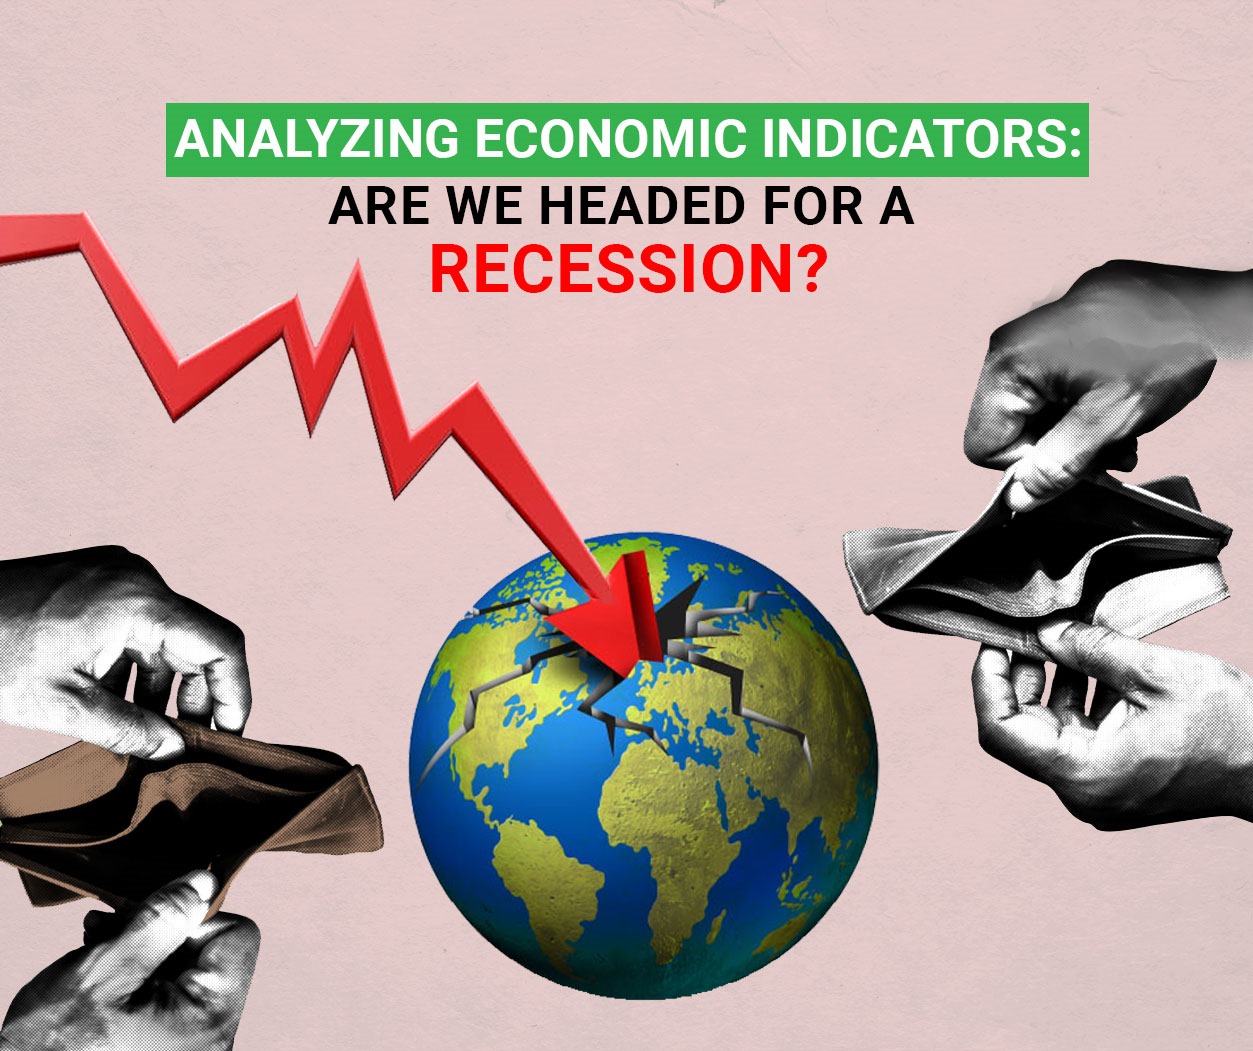 Analyzing Economic Indicators: Are We Headed for a Recession?